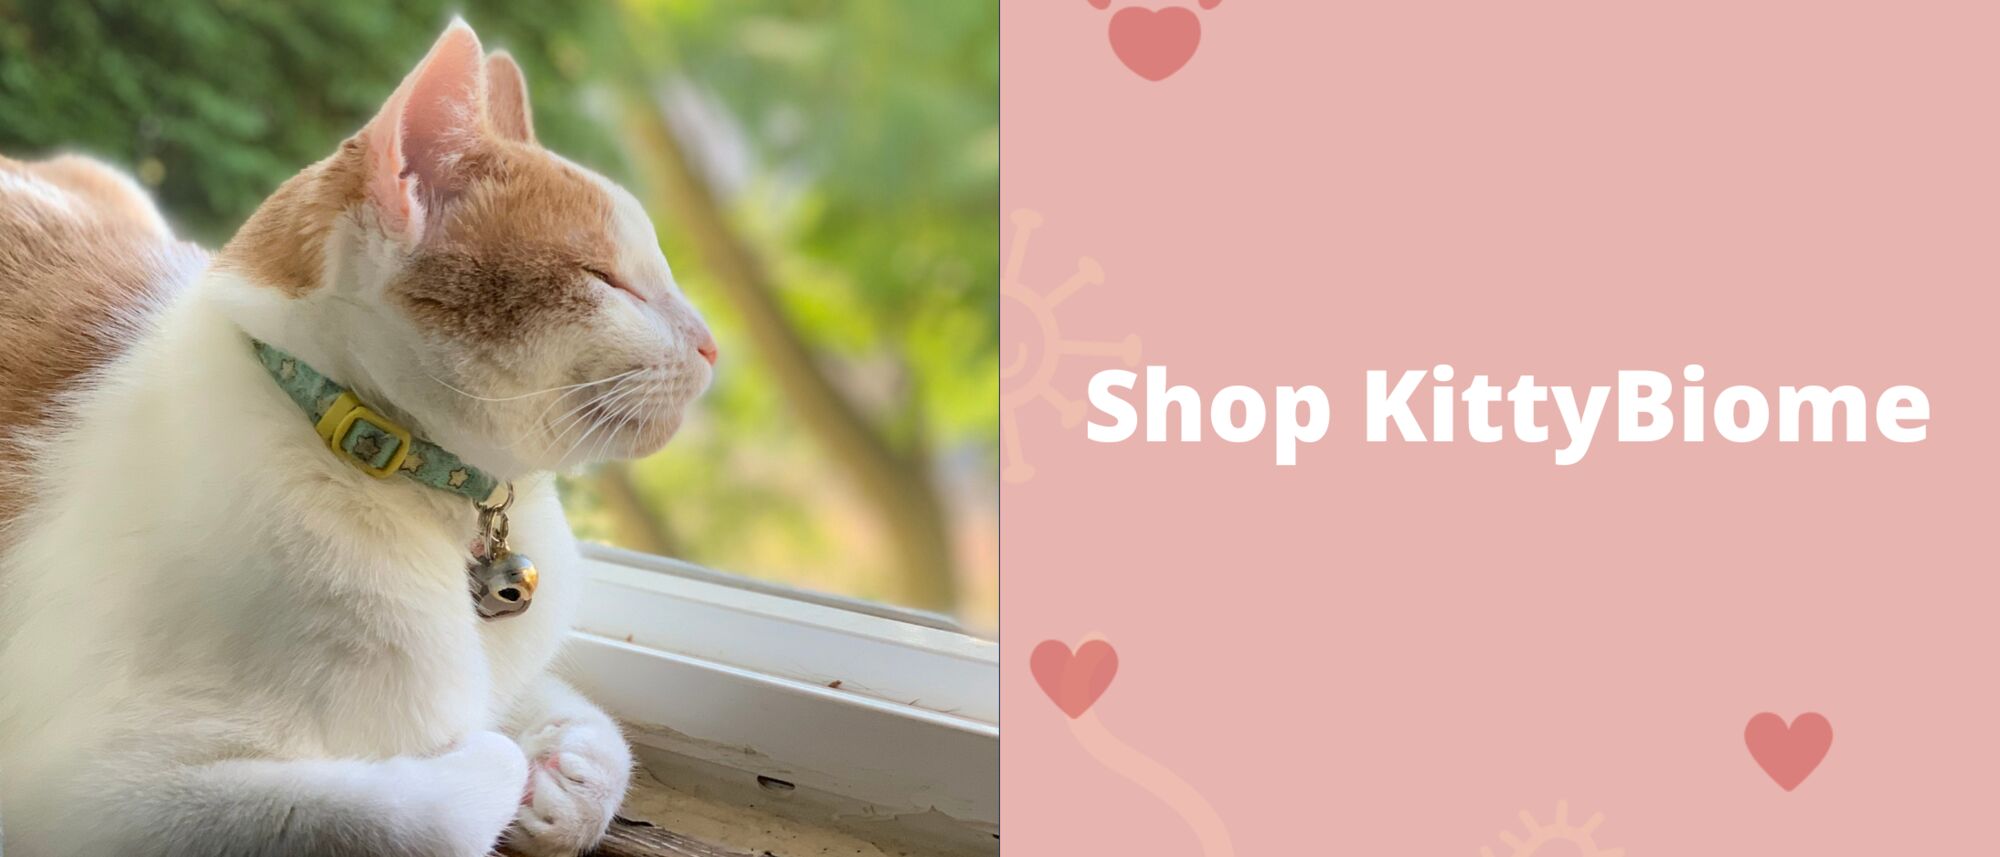 Shop KittyBiome